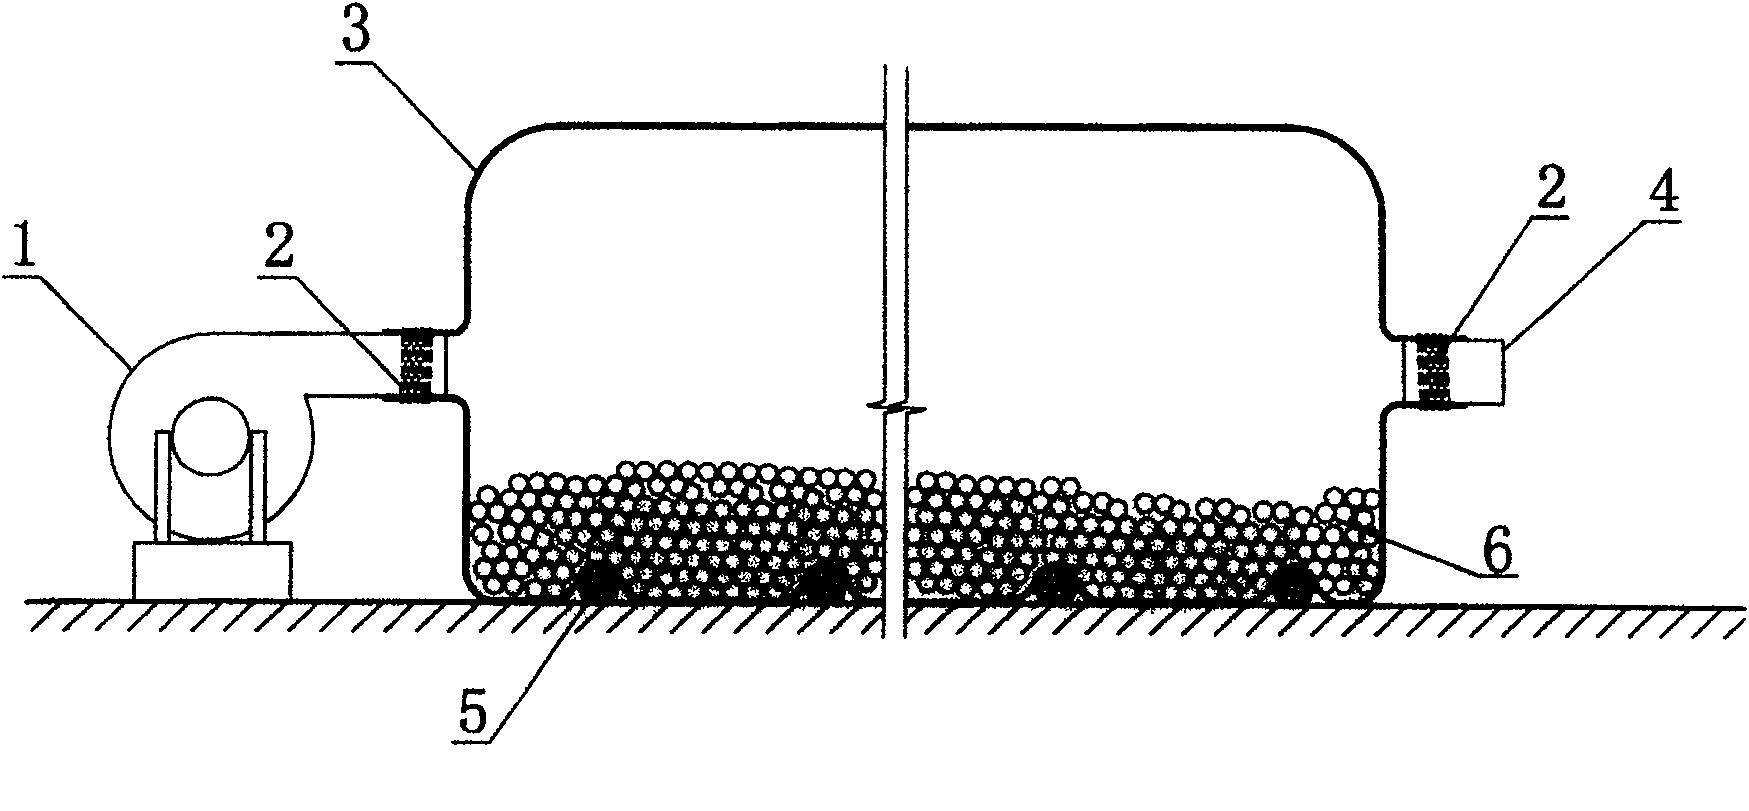 Pipeline type ambient-temp. apparatus for drying longan